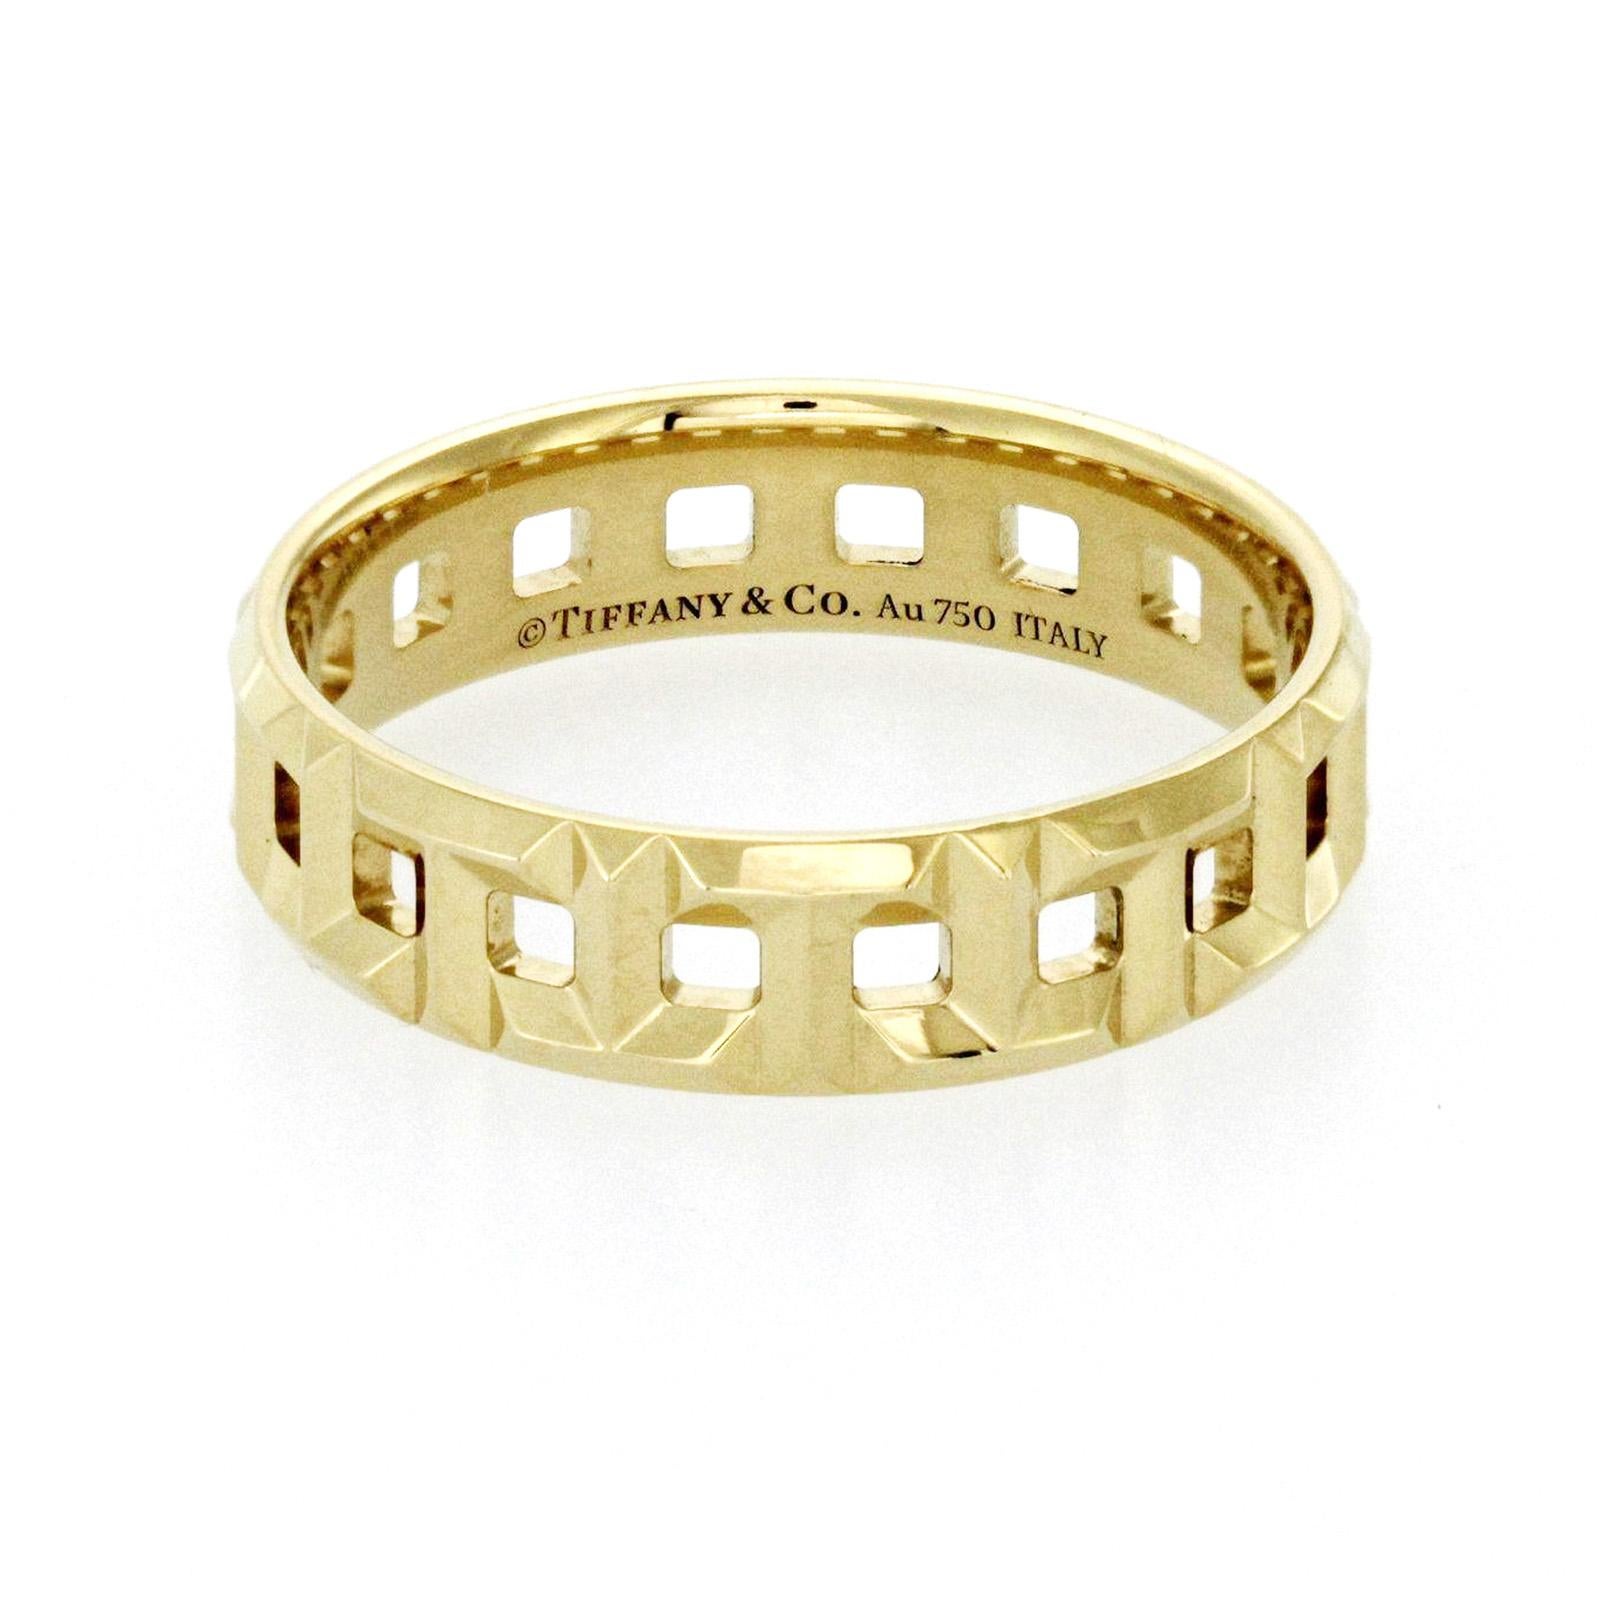 100% Authentic, 100% Customer Satisfaction

Top: 5.5 mm

Band Width: 5.5 mm

Metal: 18K Yellow Gold 

Size: 9.5

Hallmarks: Tiffany & Co 750

Total Weight: 5.4 Grams

Stone Type: None

Condition: Pre Owned

Estimated Retail Price: $1450

Stock